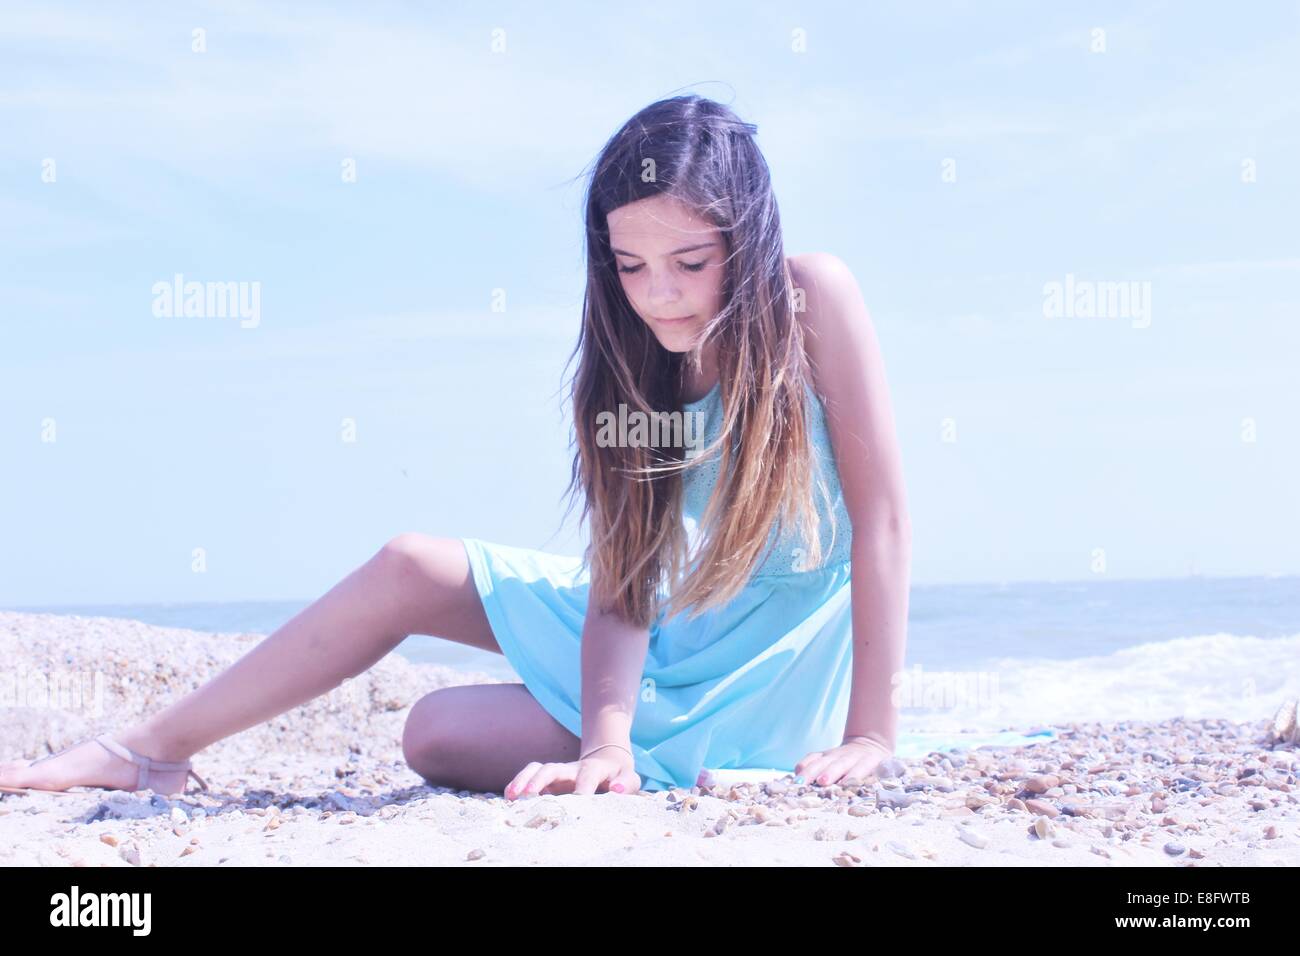 Girl sitting on beach Banque D'Images